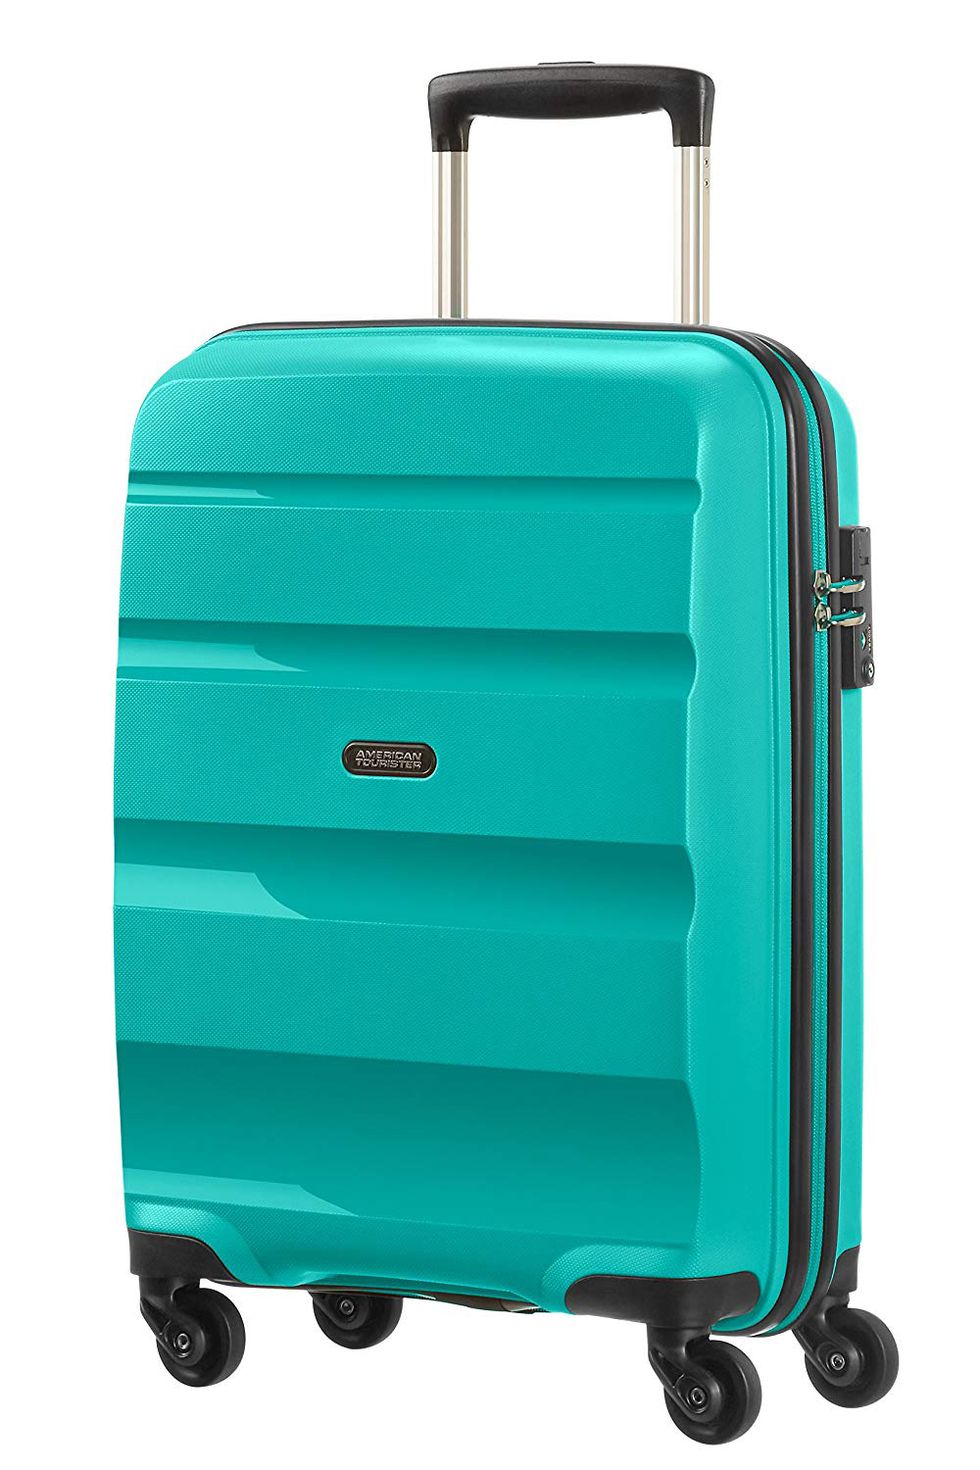 Suitcase, Hand luggage, Turquoise, Aqua, Teal, Bag, Rolling, Luggage and bags, Baggage, Automotive wheel system, 